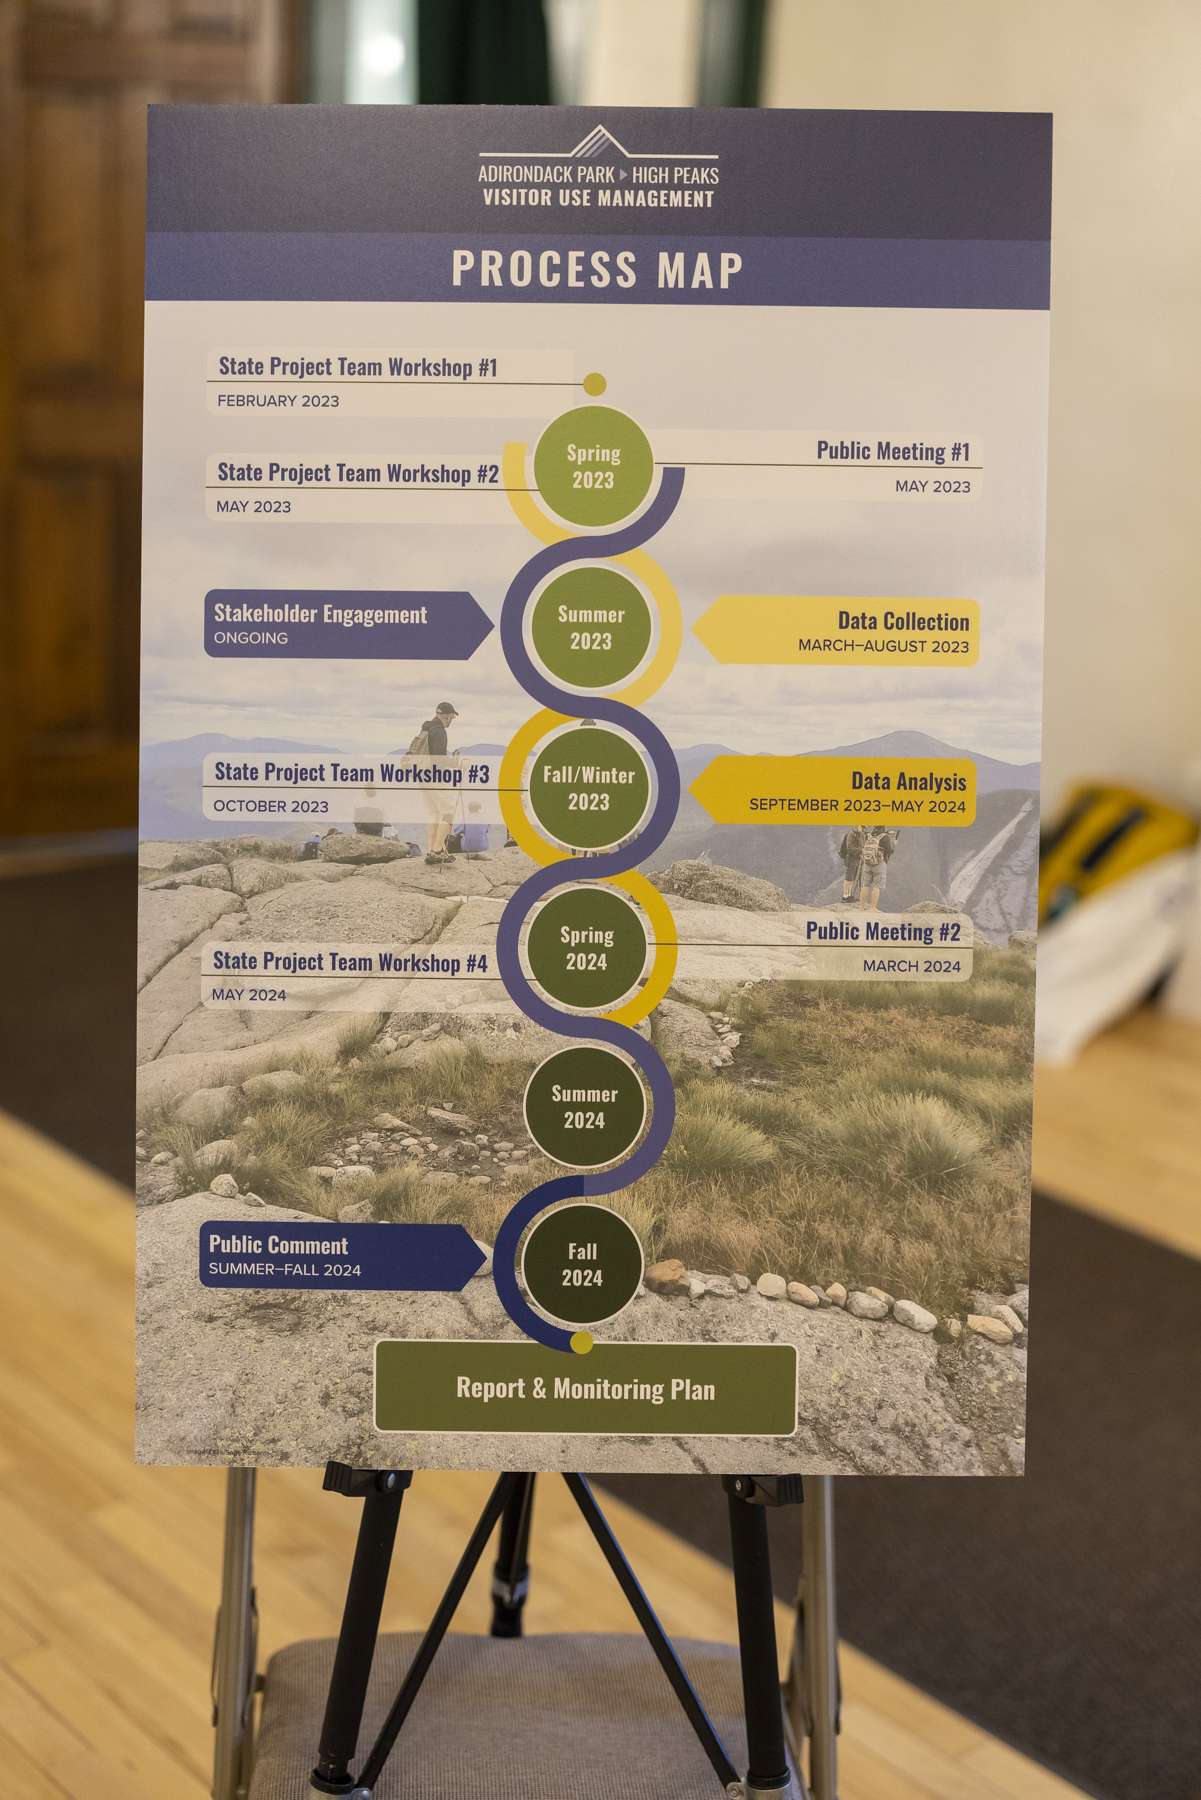 A map showing the timeline for the High Peaks visitor use management process. Photo by Mike Lynch